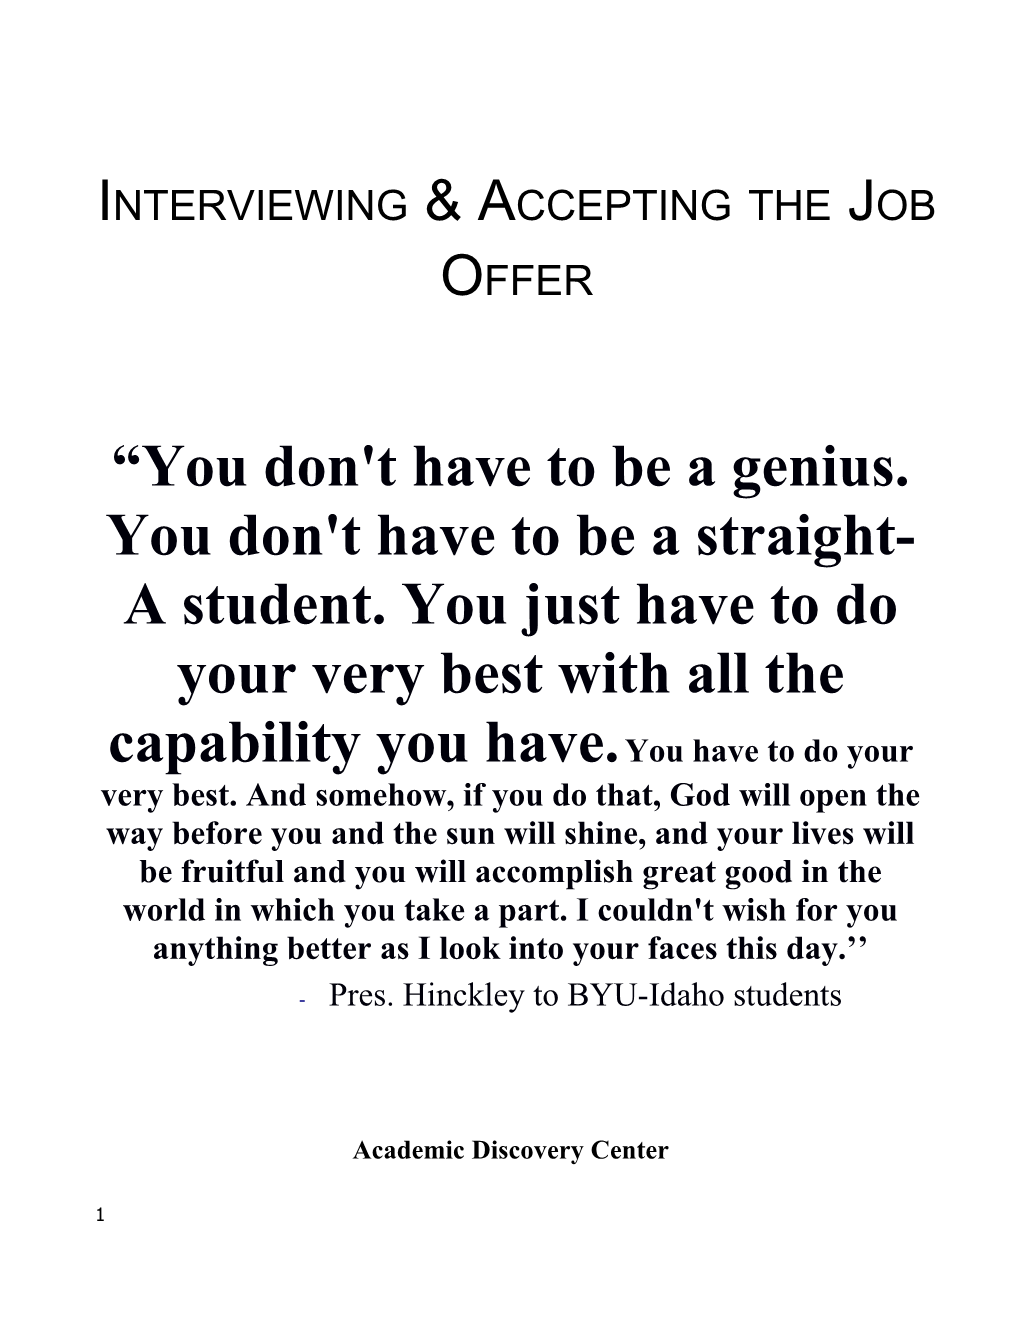 Interviewing & Accepting the Job Offer